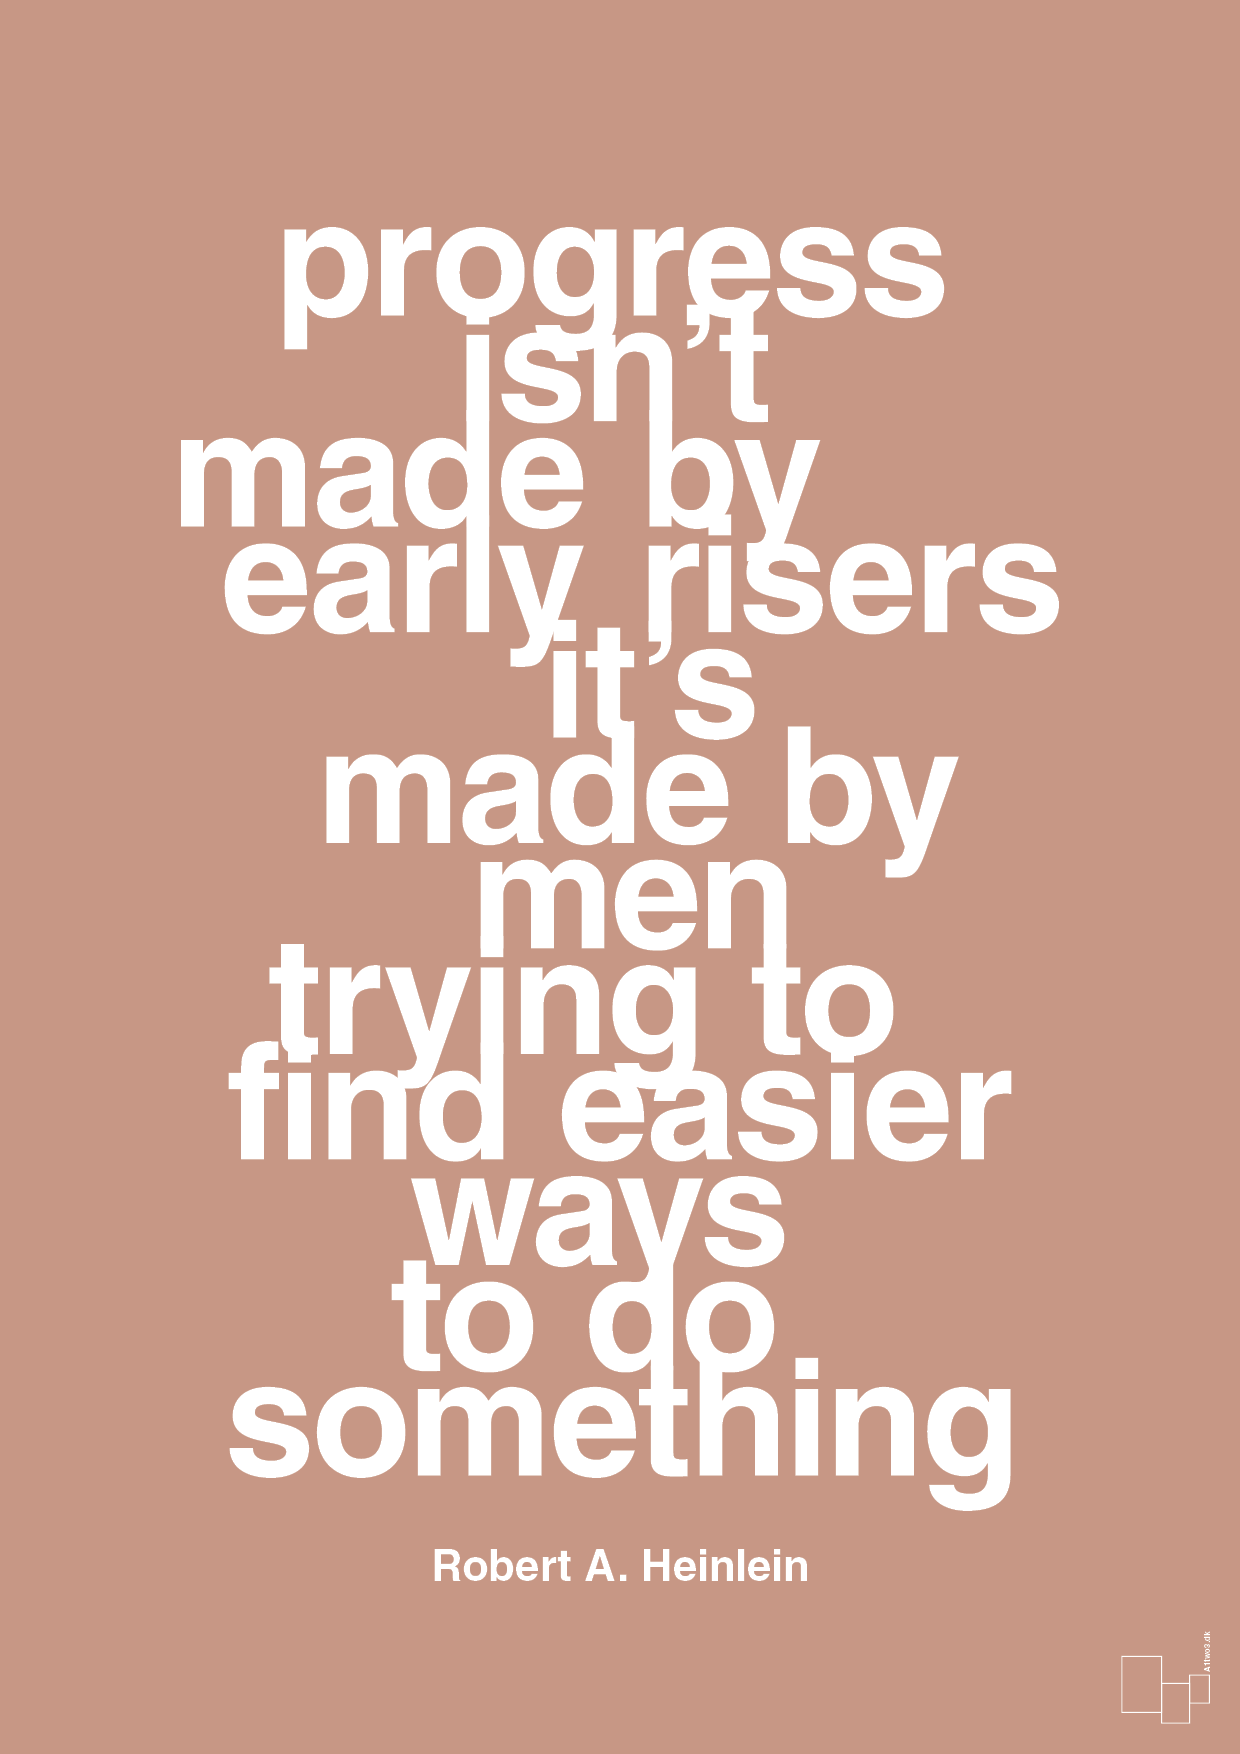 progress isnt made by early risers - Plakat med Citater i Powder